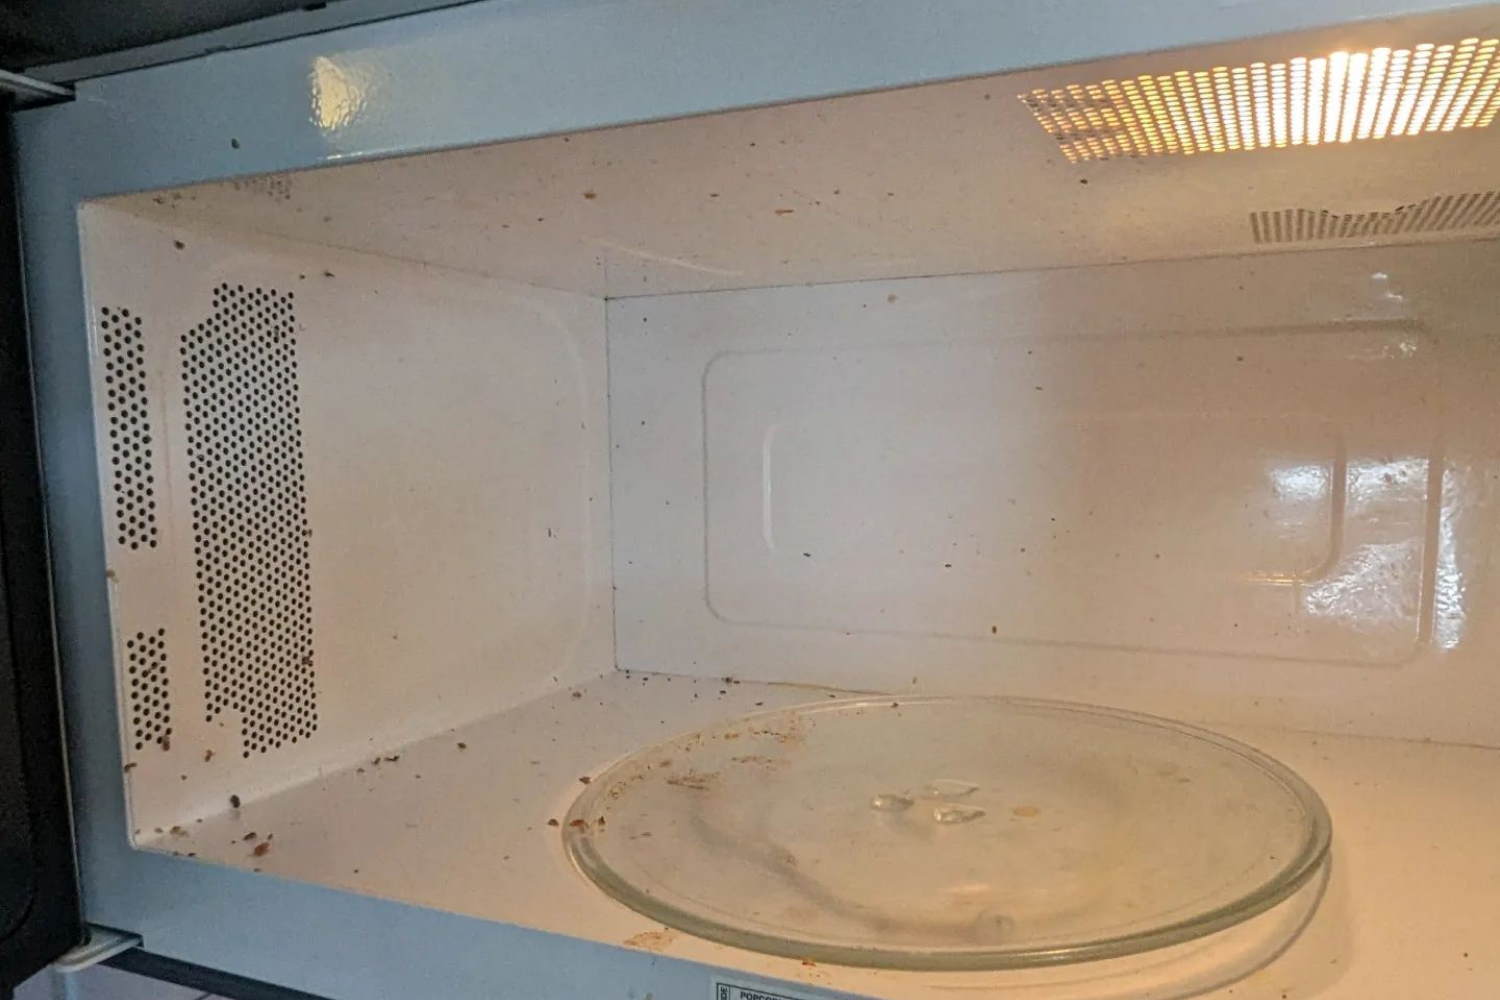 Why Is It Important To Clean Melted Butter Out Of The Microwave?